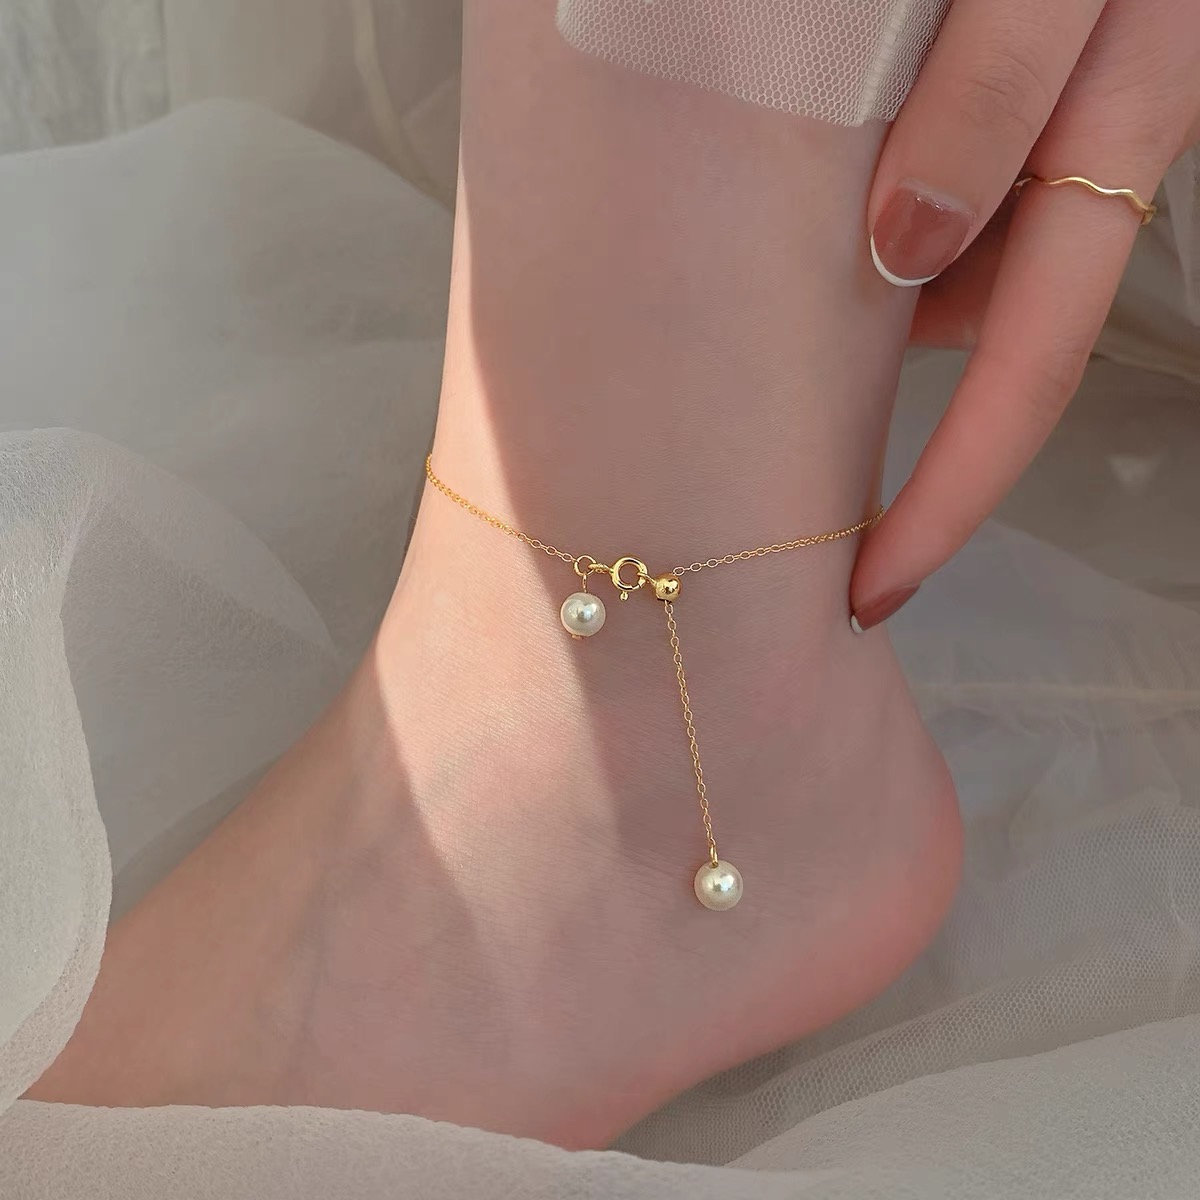 Freshwater Pearl Anklet Waterproof Anklets 14K Gold Filled Chain